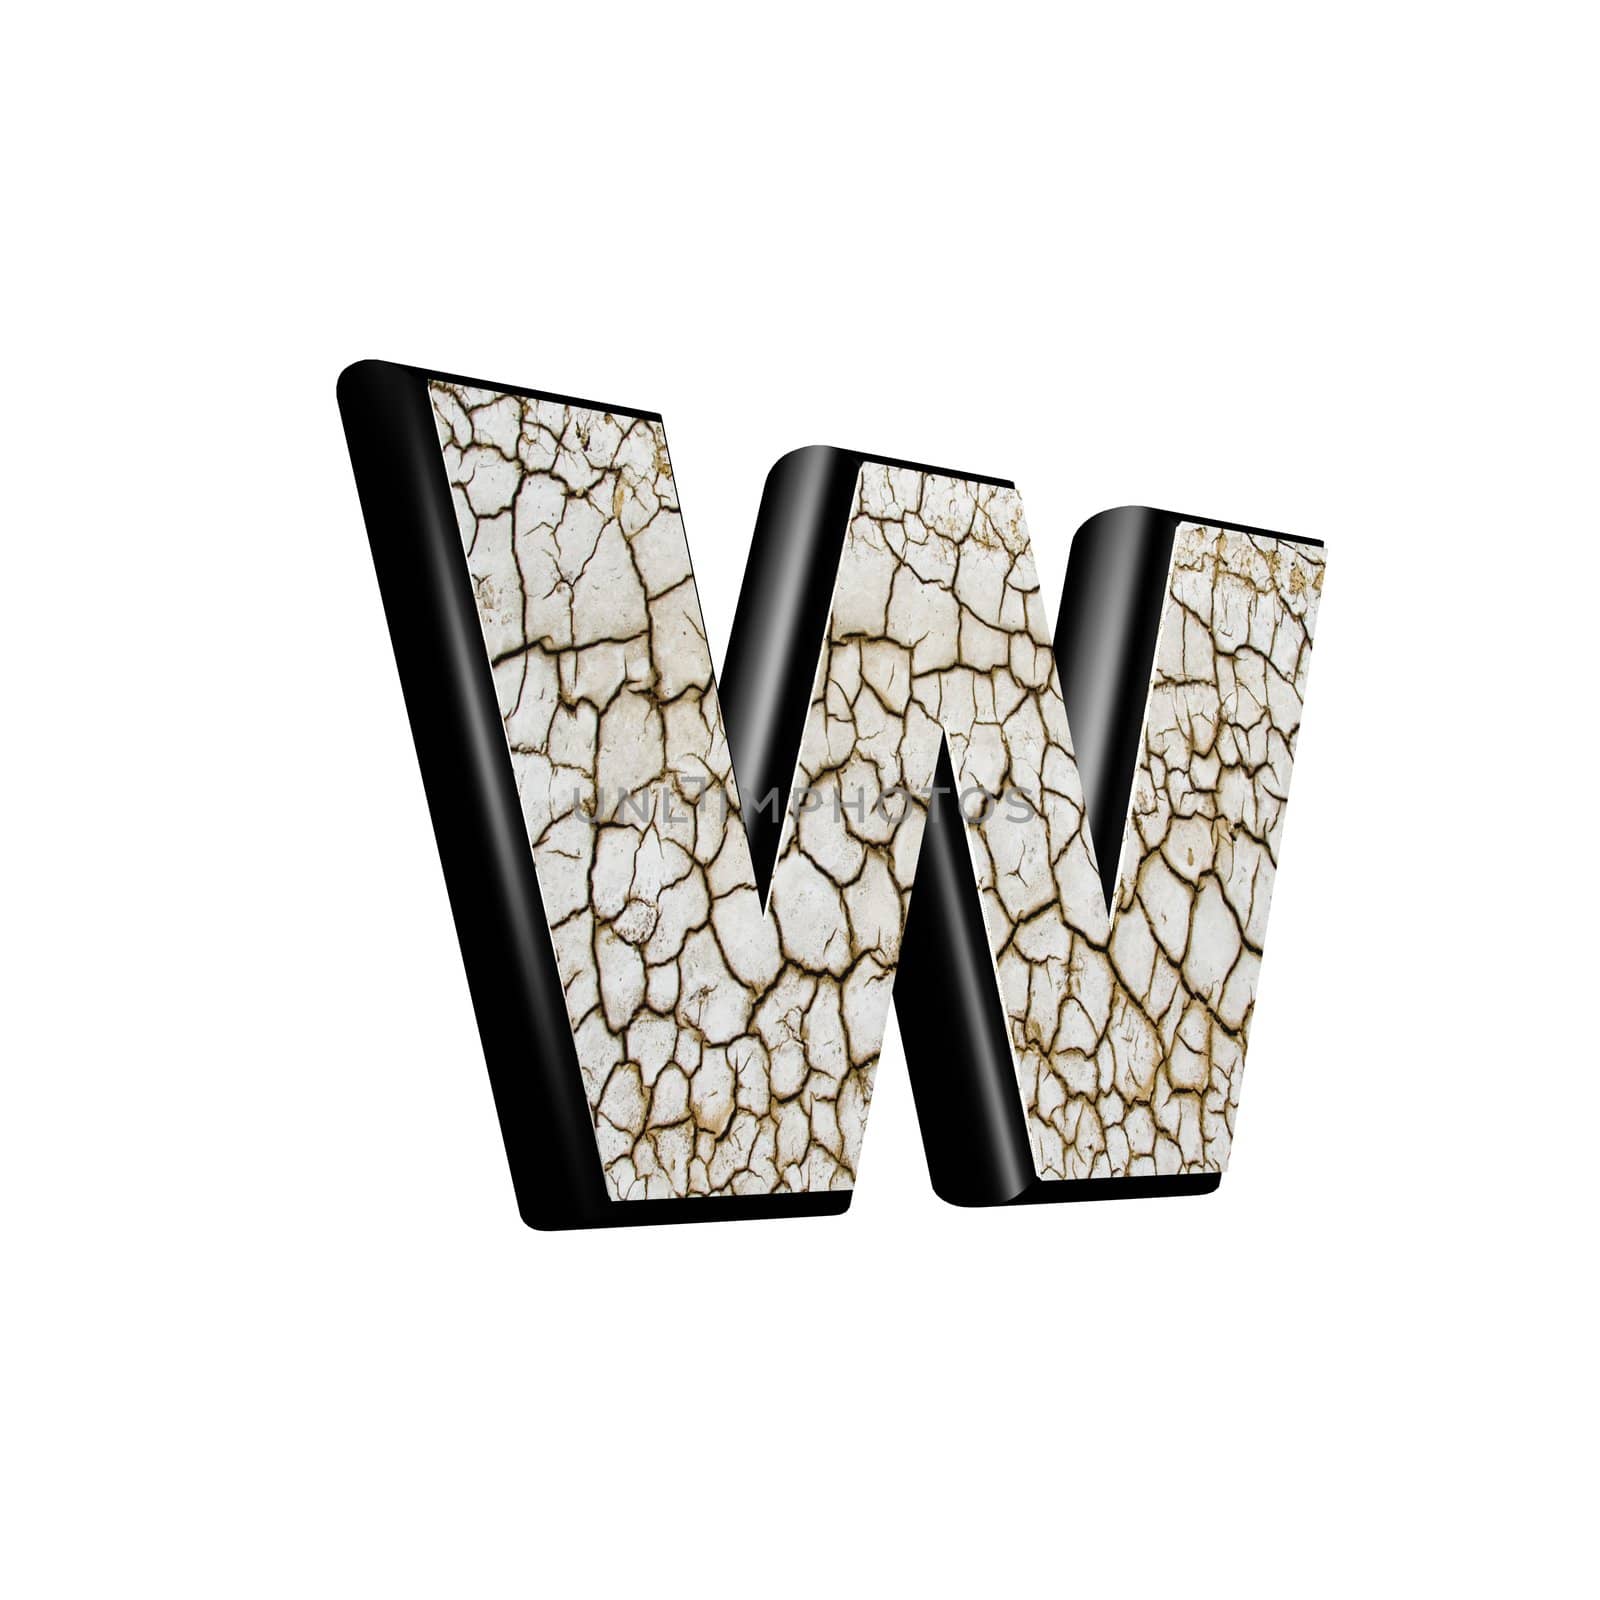 abstract 3d letter with dry ground texture - W by chrisroll